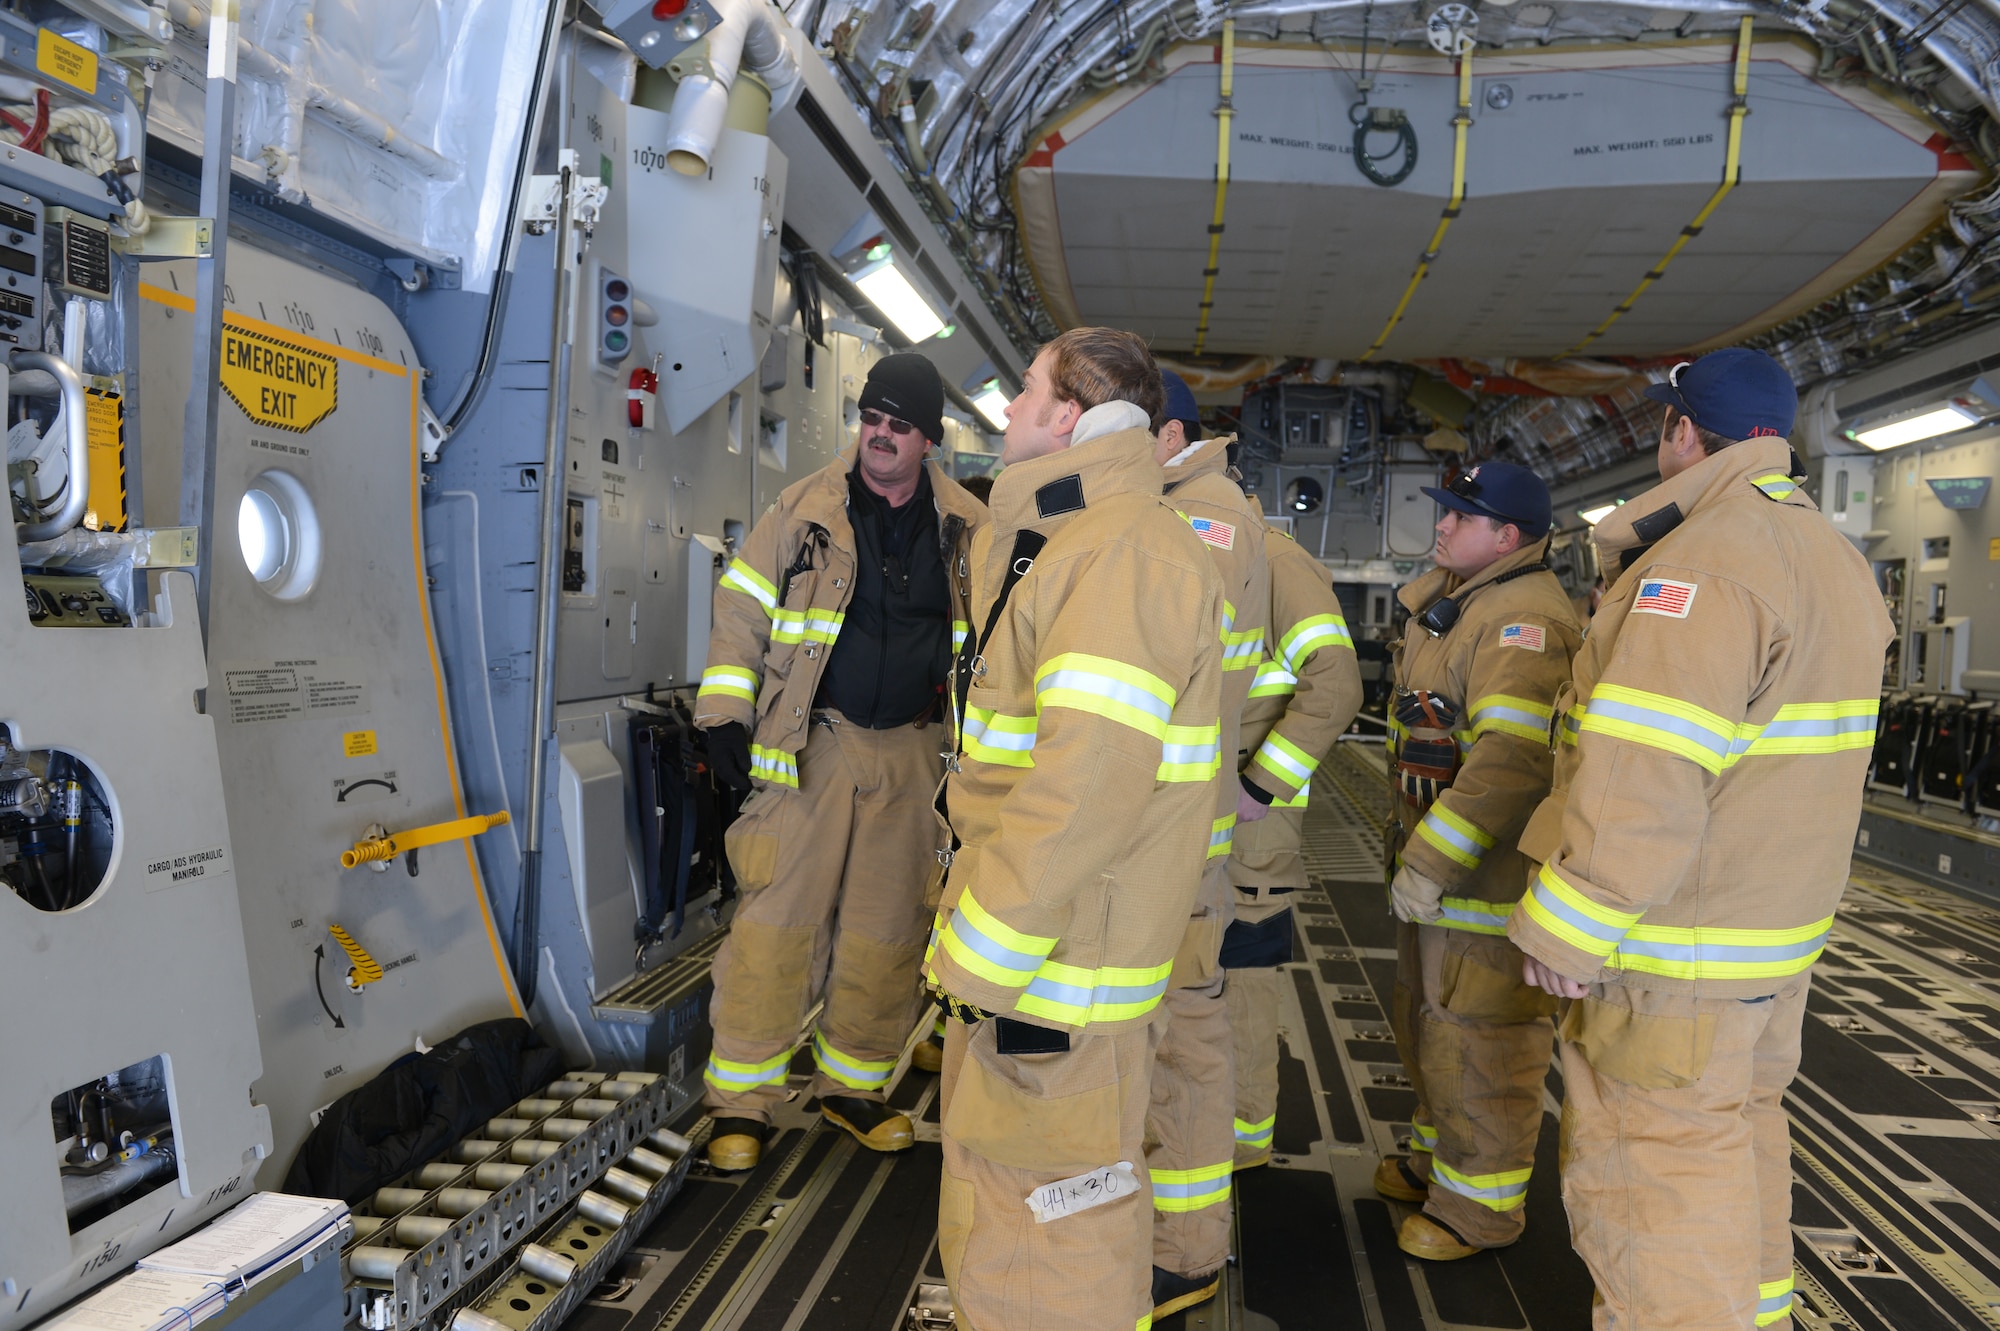 McMurdo station firefighters check out one of the exit doors on the McChord Field C-17 Globemaster III aircraft, Oct. 8th, 2014 at the Pegasus White Ice runway, part of McMurdo Station, Antarctica. The firefighters do not get many opportunities to look at all the capabilities of the C-17 and used this chance to get a look at all of its exit points. (U.S. Air Force photo/Master Sgt. Todd Wivell)